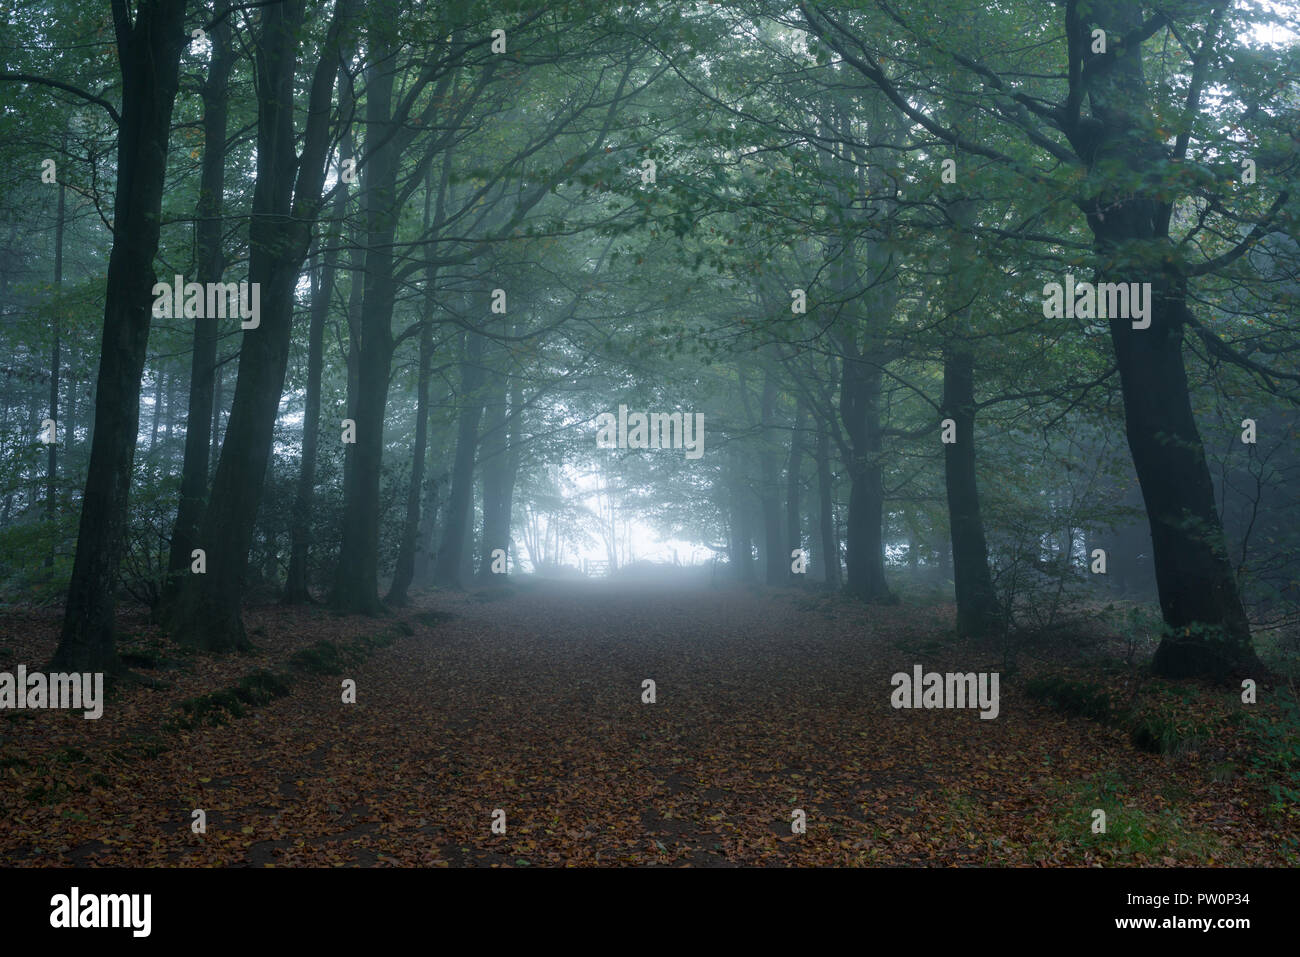 Morning mist in a deciduous woodland. Stockhill Wood, Mendip Hills, Somerset, England. Stock Photo